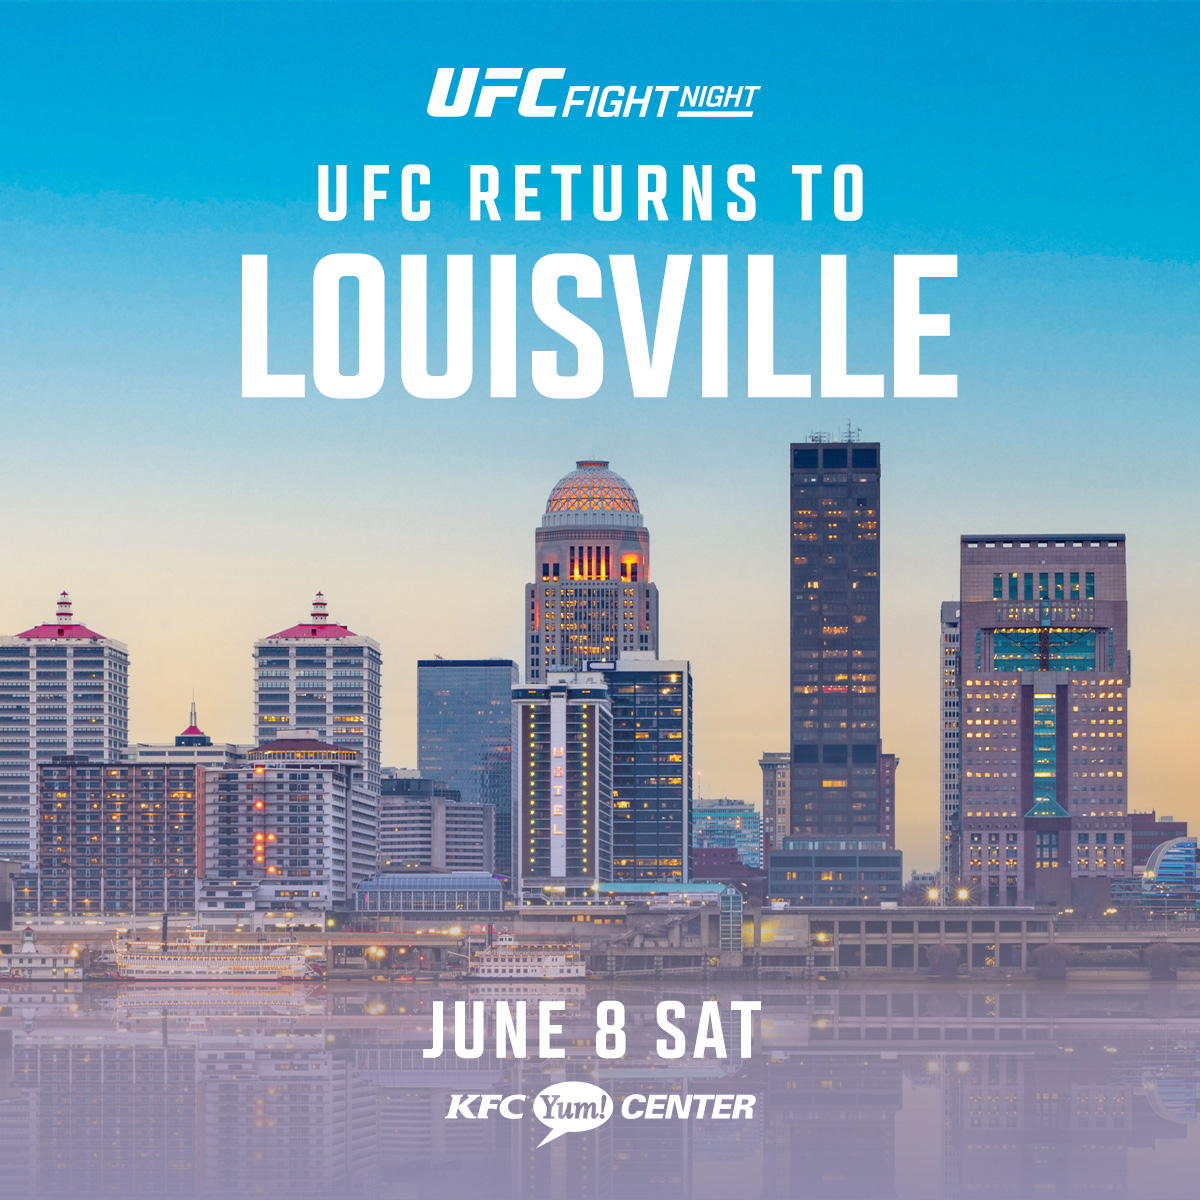 Mark your calendars, UFC goes on sale this Friday at 10 am! Want tickets earlier? Sign up for our presale email! ✉️: bit.ly/YumInsiderClub